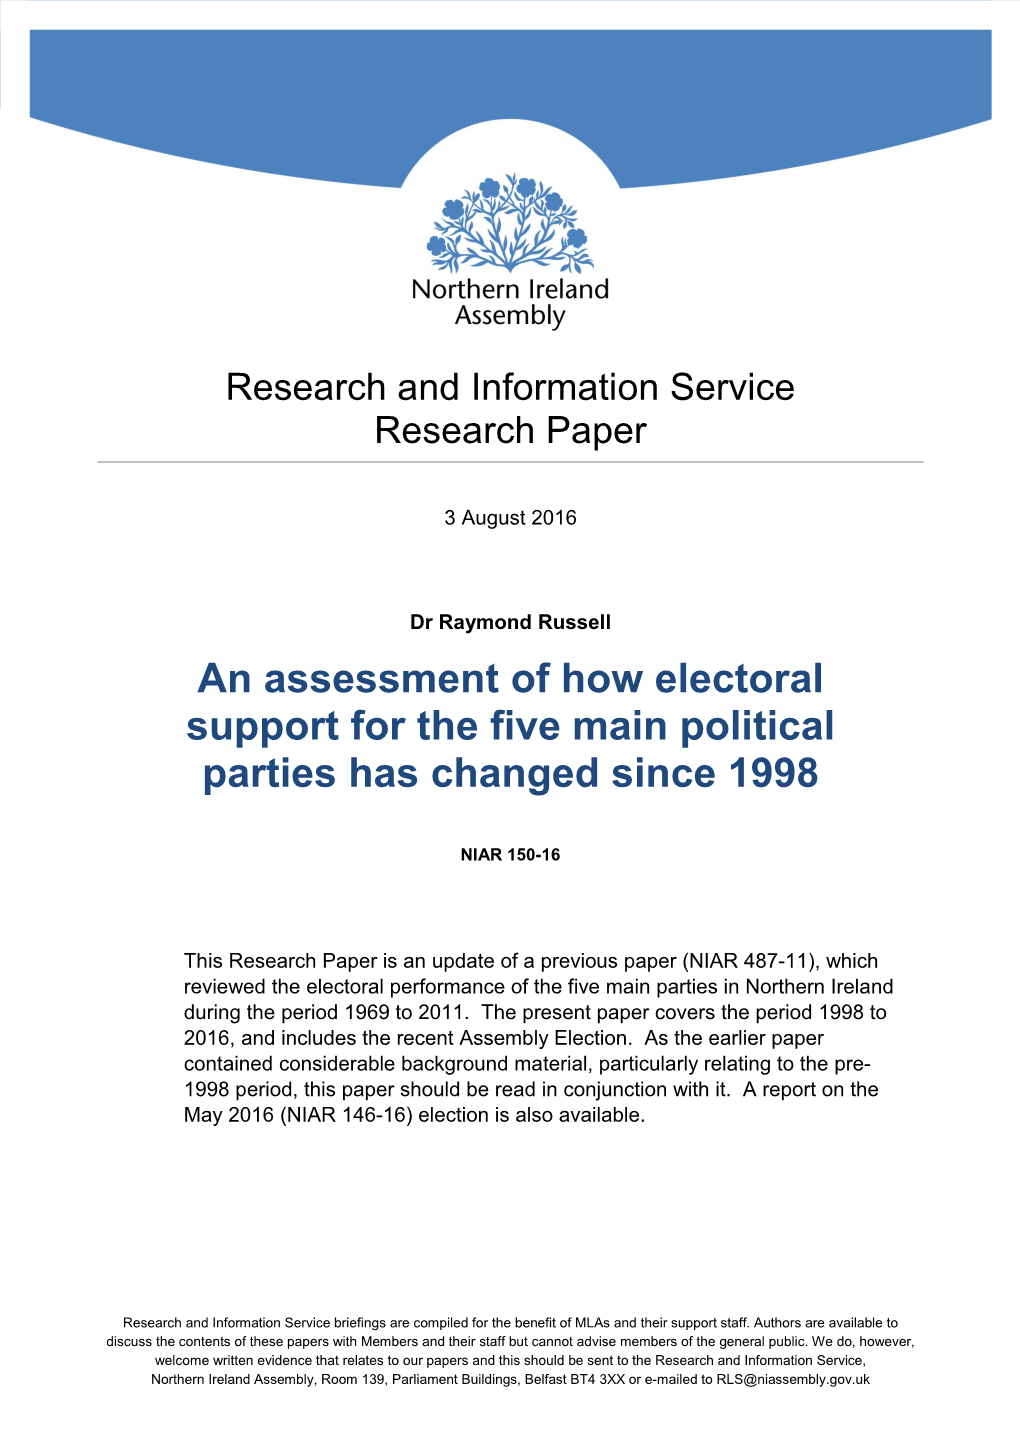 An Assessment of How Electoral Support for the Five Main Political Parties Has Changed Since 1998